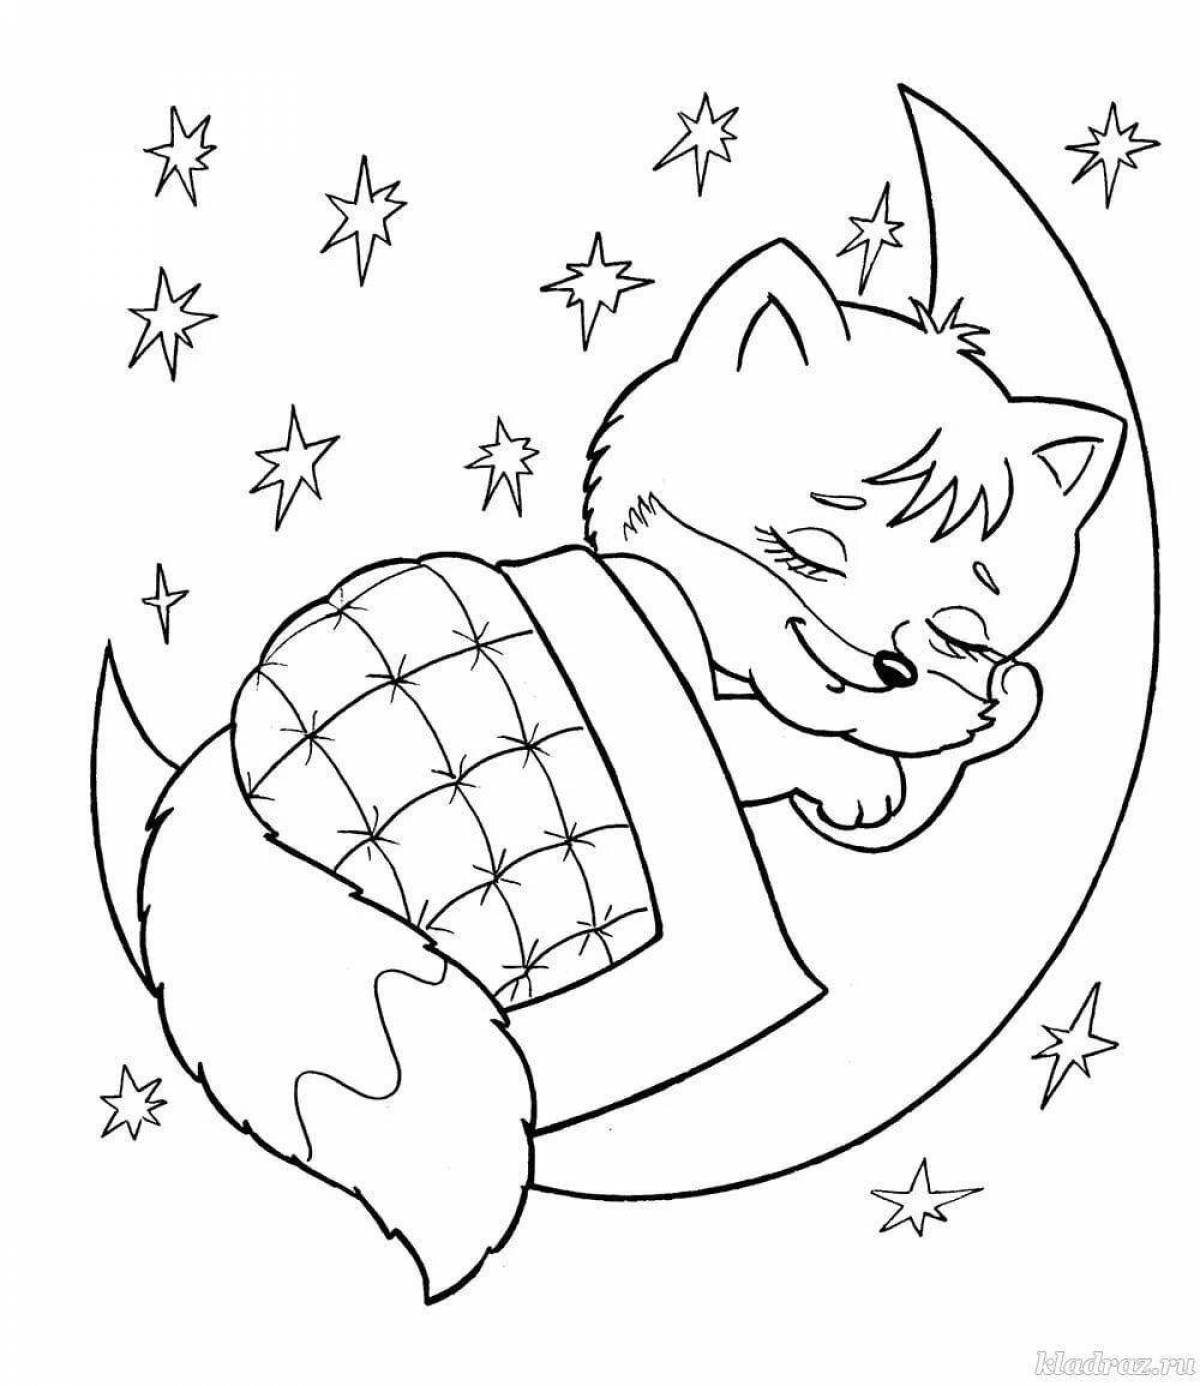 Color-frenzy coloring page for children 5-7 years old